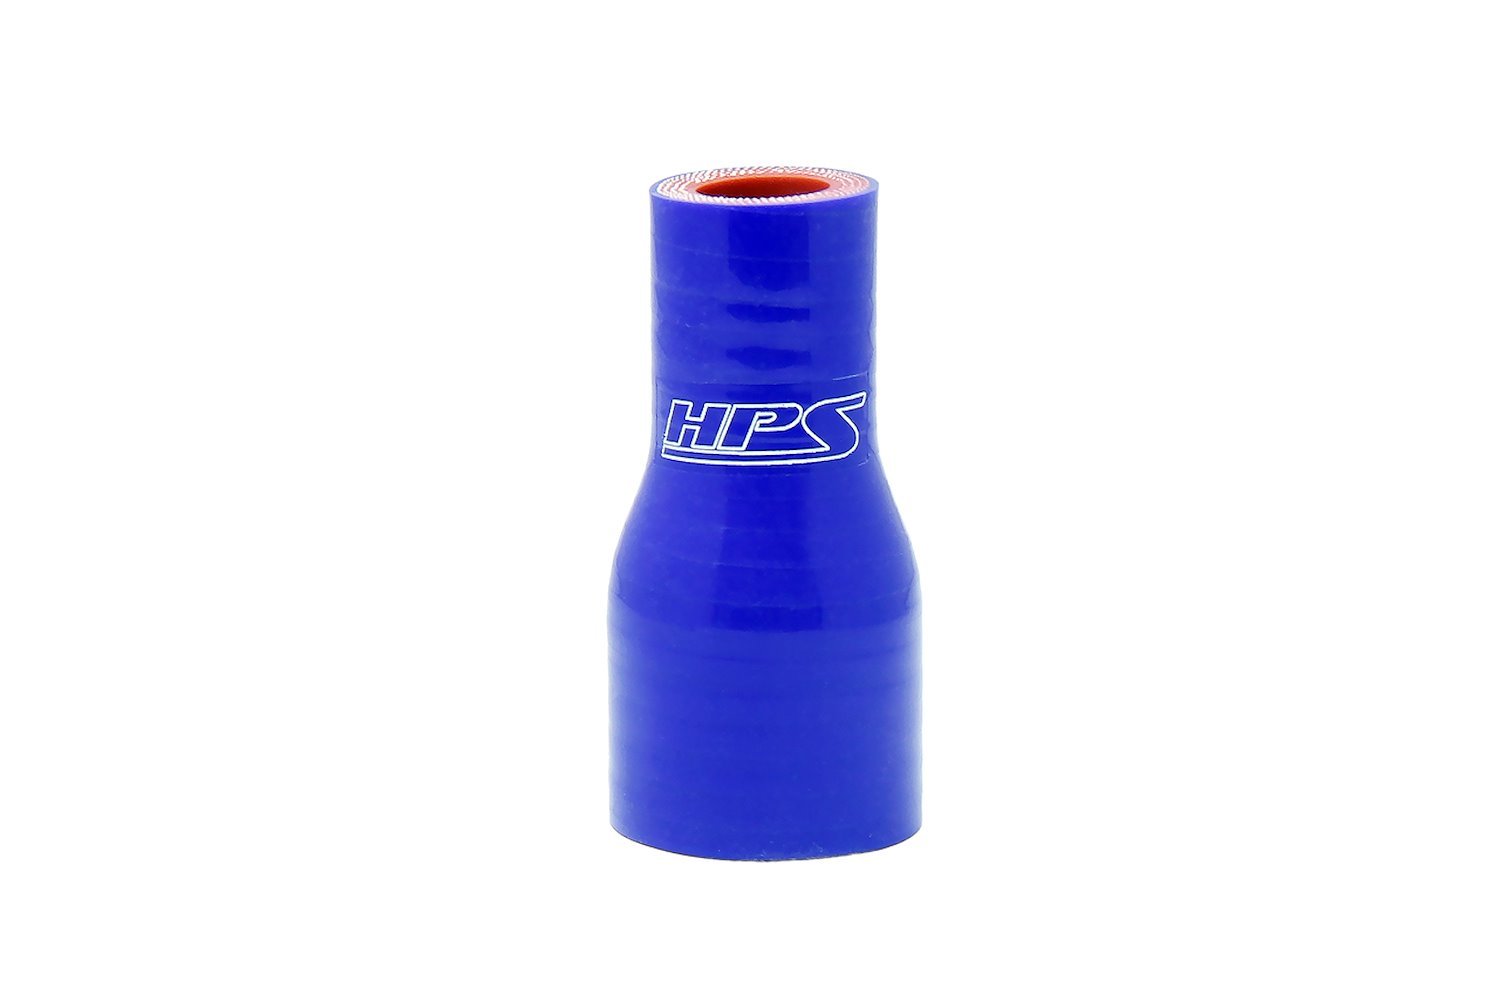 HTSR-138-187-BLUE Silicone Reducer Hose, High-Temp 4-Ply Reinforced, 1-3/8 in. - 1-7/8 in. ID, 3 in. Long, Blue